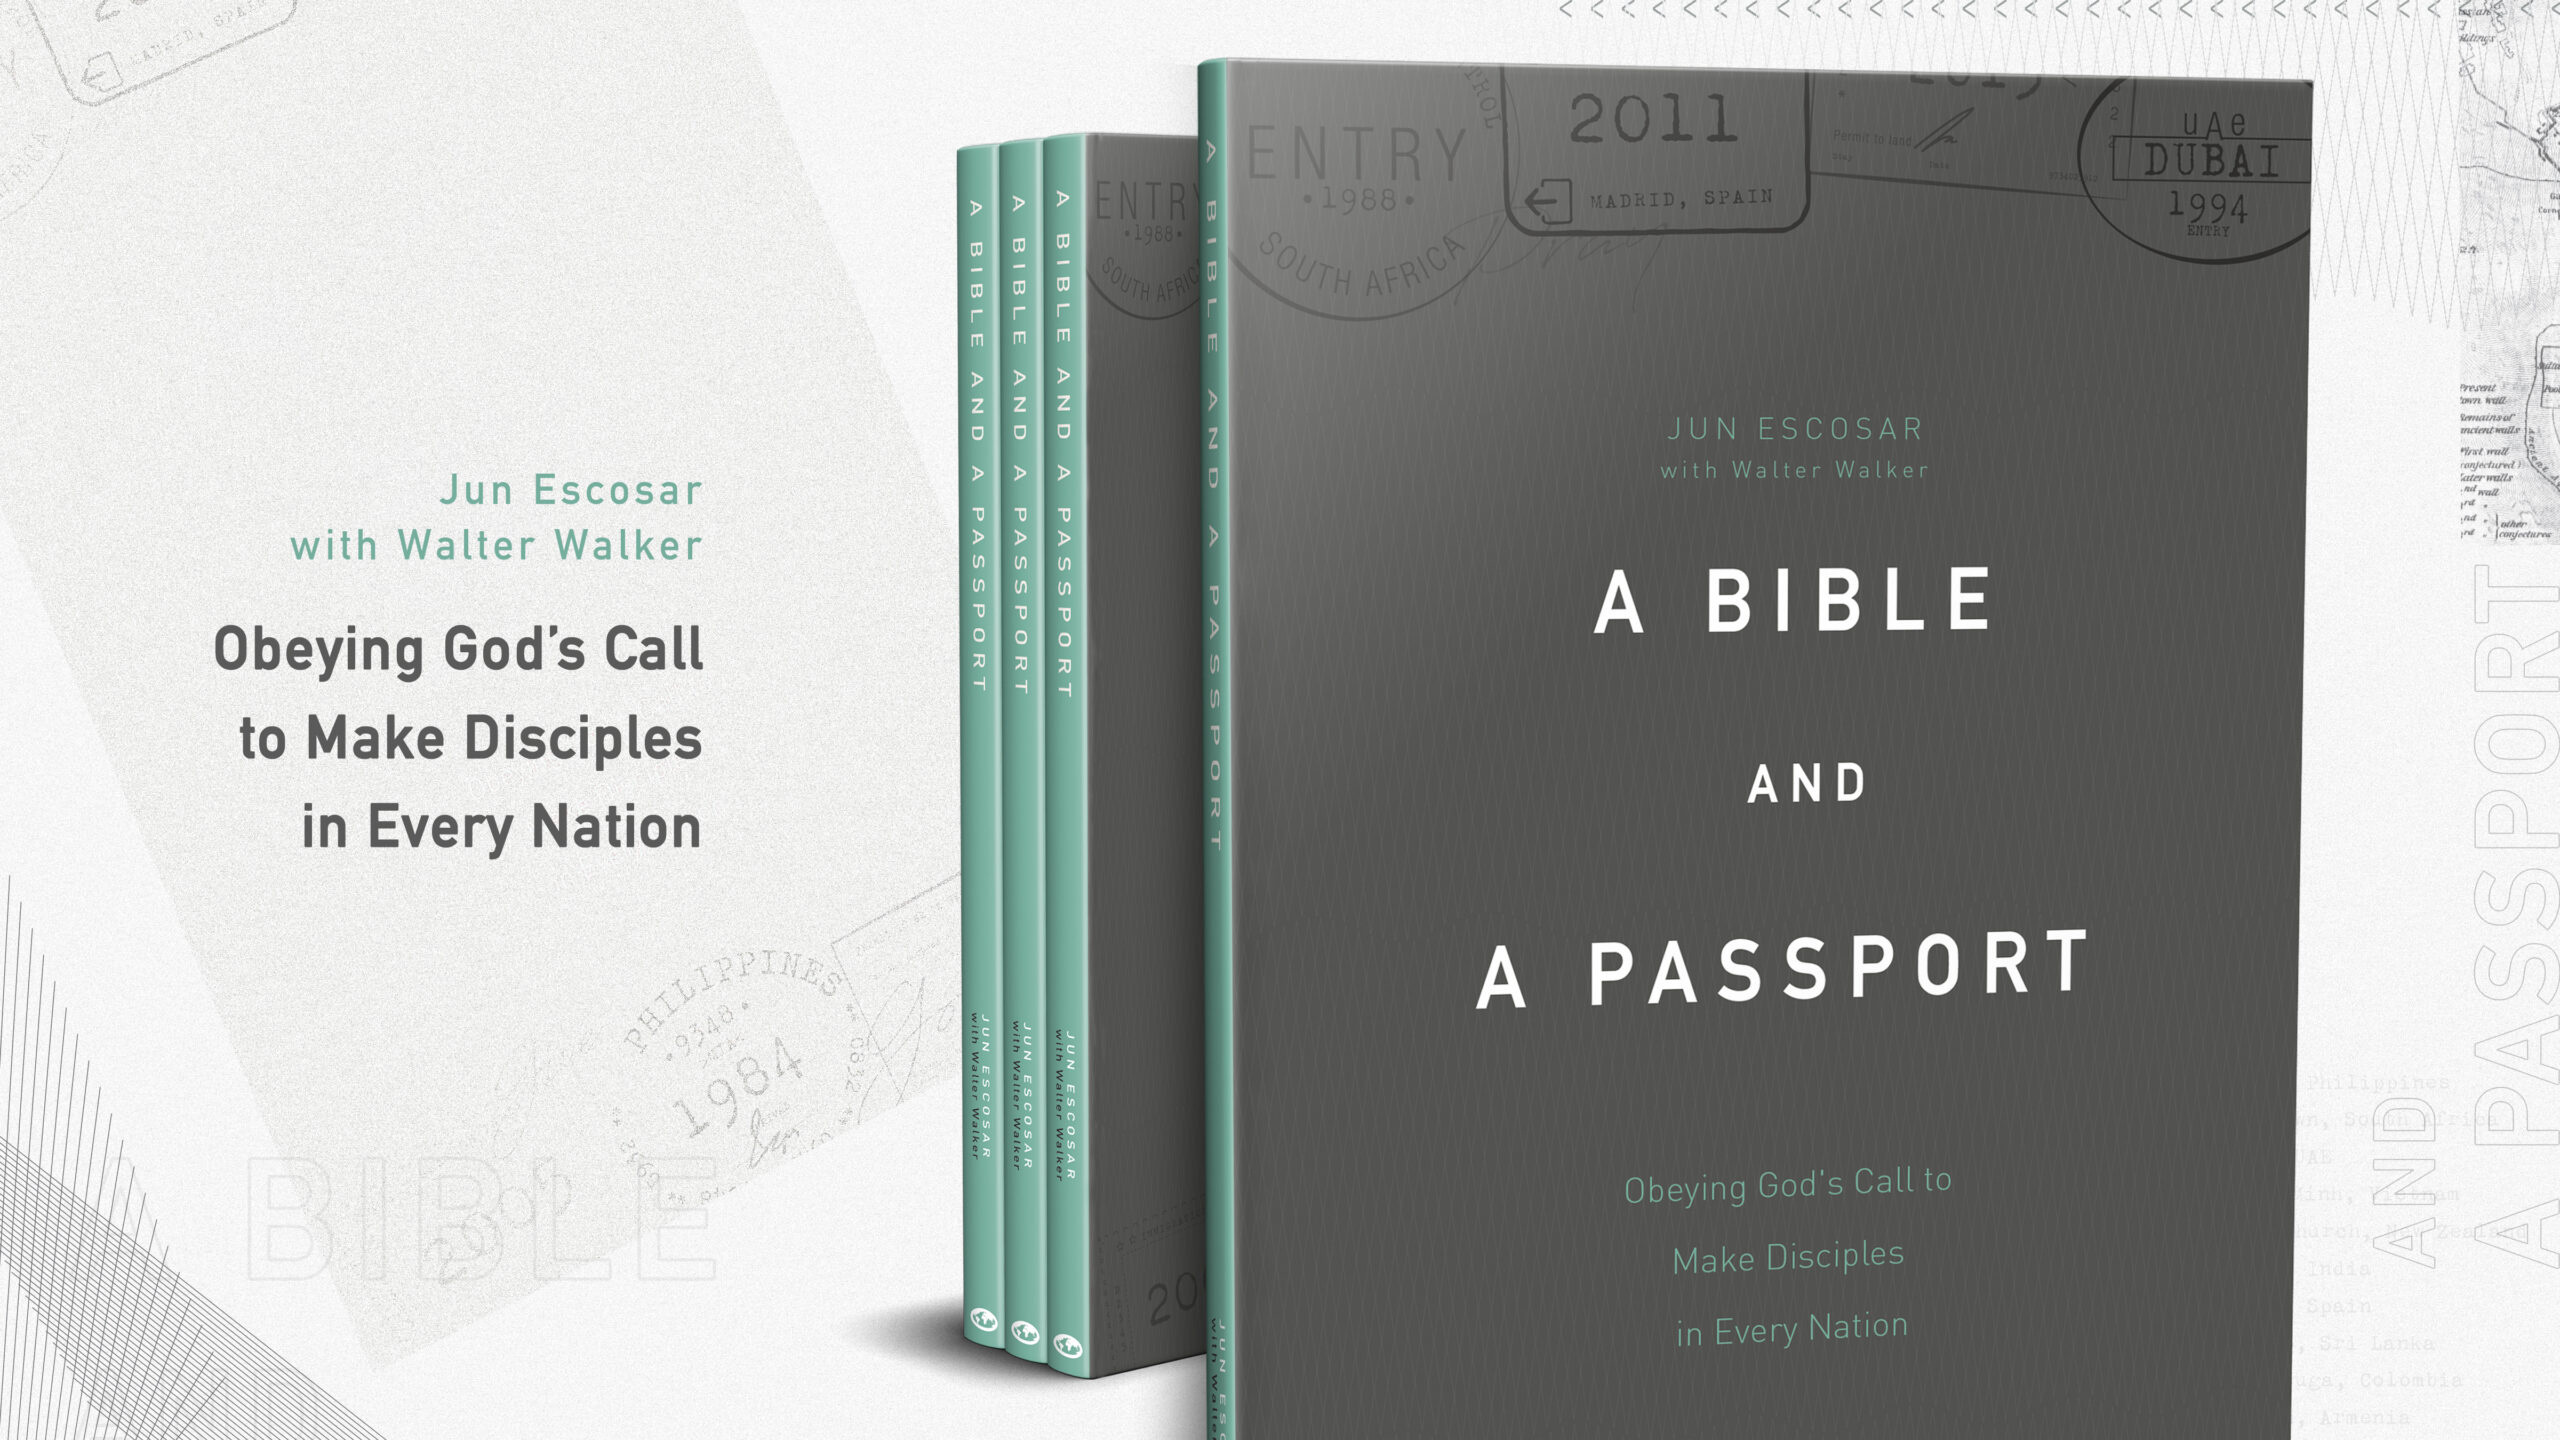 A Bible and a Passport